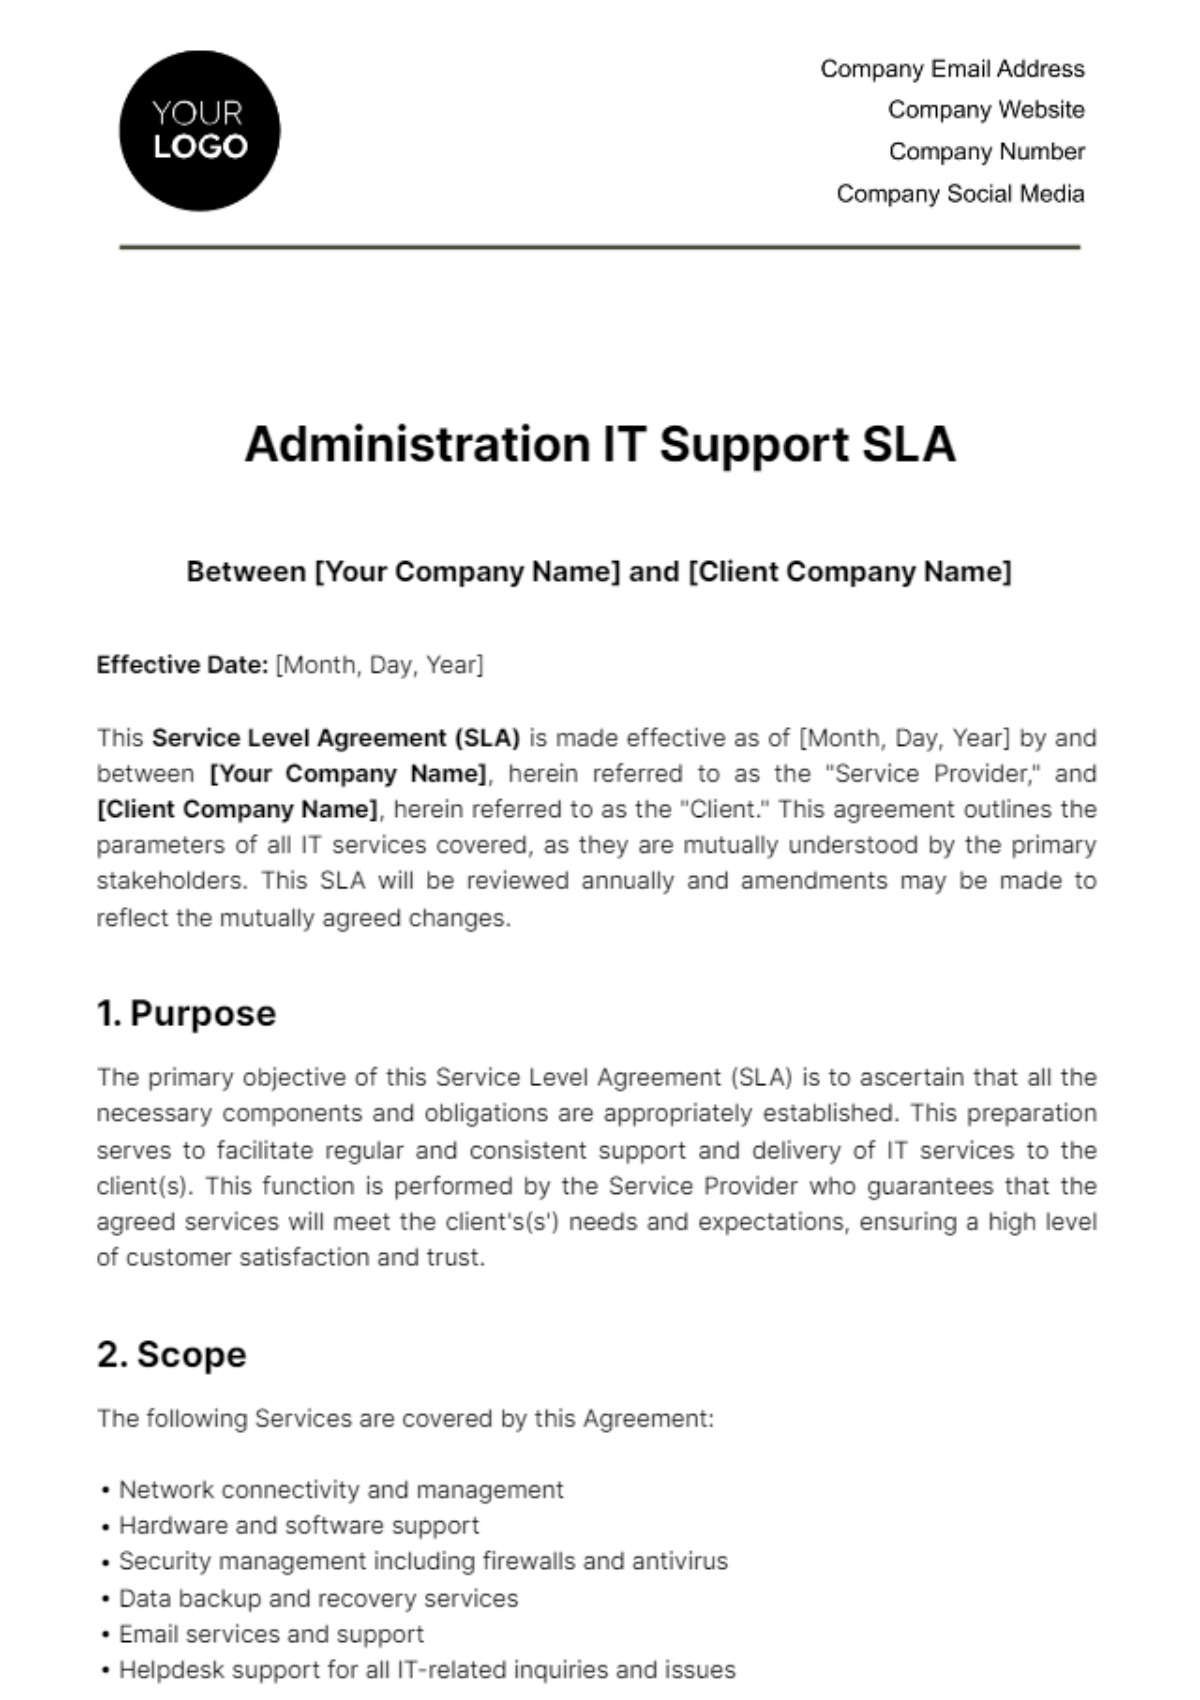 Free Administration IT Support SLA Template